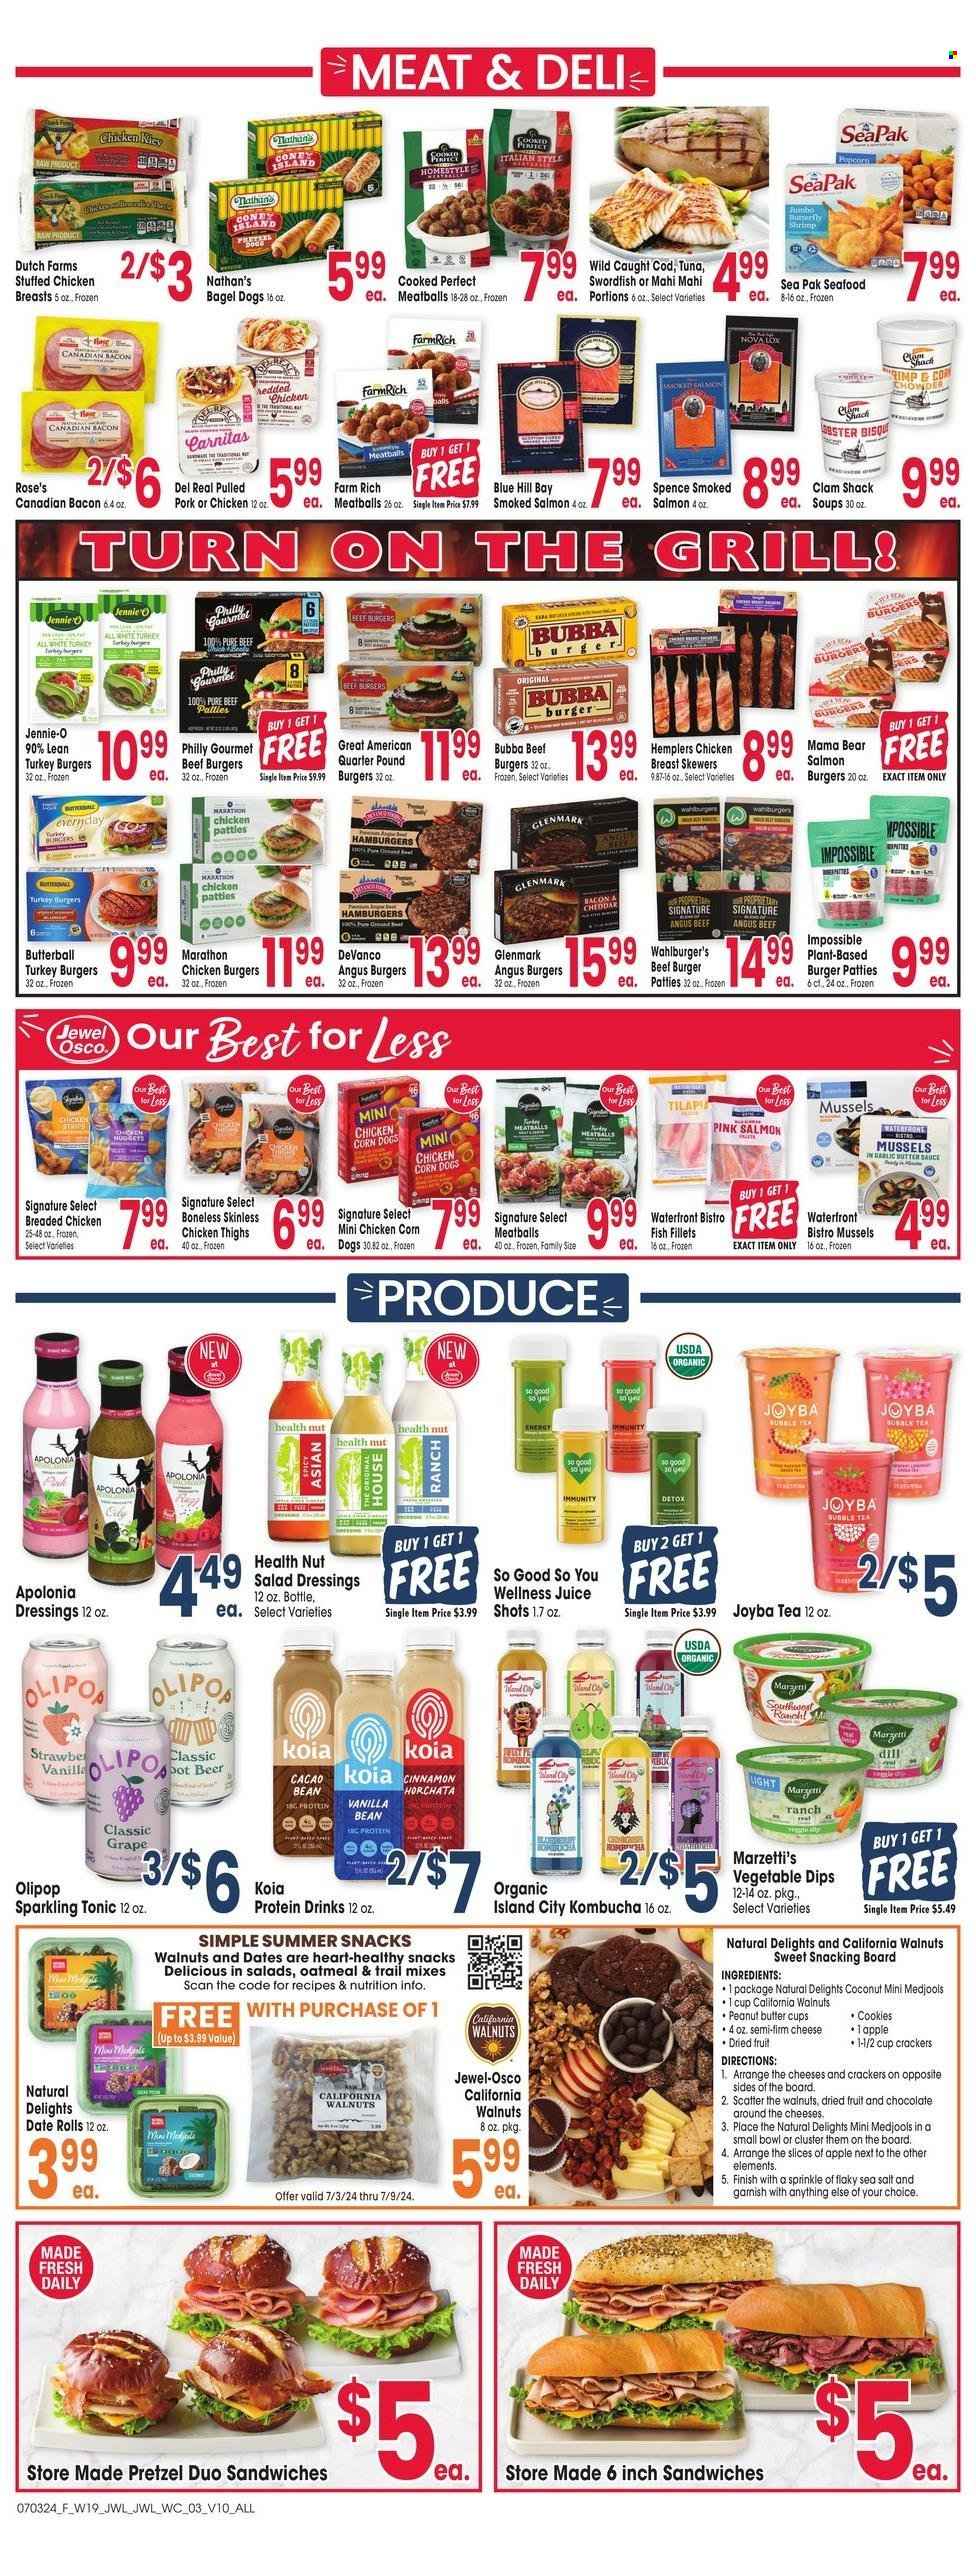 thumbnail - Jewel Osco Flyer - 07/03/2024 - 07/09/2024 - Sales products - pretzels, clams, cod, fish fillets, mahi mahi, mussels, salmon, smoked salmon, swordfish, tilapia, tuna, seafood, shrimps, meatballs, sandwich, soup, snack, hamburger, veggie burger, beef burger, bagel dogs, burger patties, pulled pork, pulled chicken, stuffed chicken, ready meal, plant based ready meal, breaded chicken, plant based product, Butterball, canadian bacon, crushed garlic, protein drink, koia, chicken corn, chicken patties, Chicken Kiev, cookies, peanut butter cups, popcorn, salty snack, oatmeal, cinnamon, salad dressing, dressing, walnuts, dried fruit, juice, tonic, So Good So You, kombucha, tea, bubble tea, beer, chicken thighs, meat skewer, turkey burger, grill. Page 3.